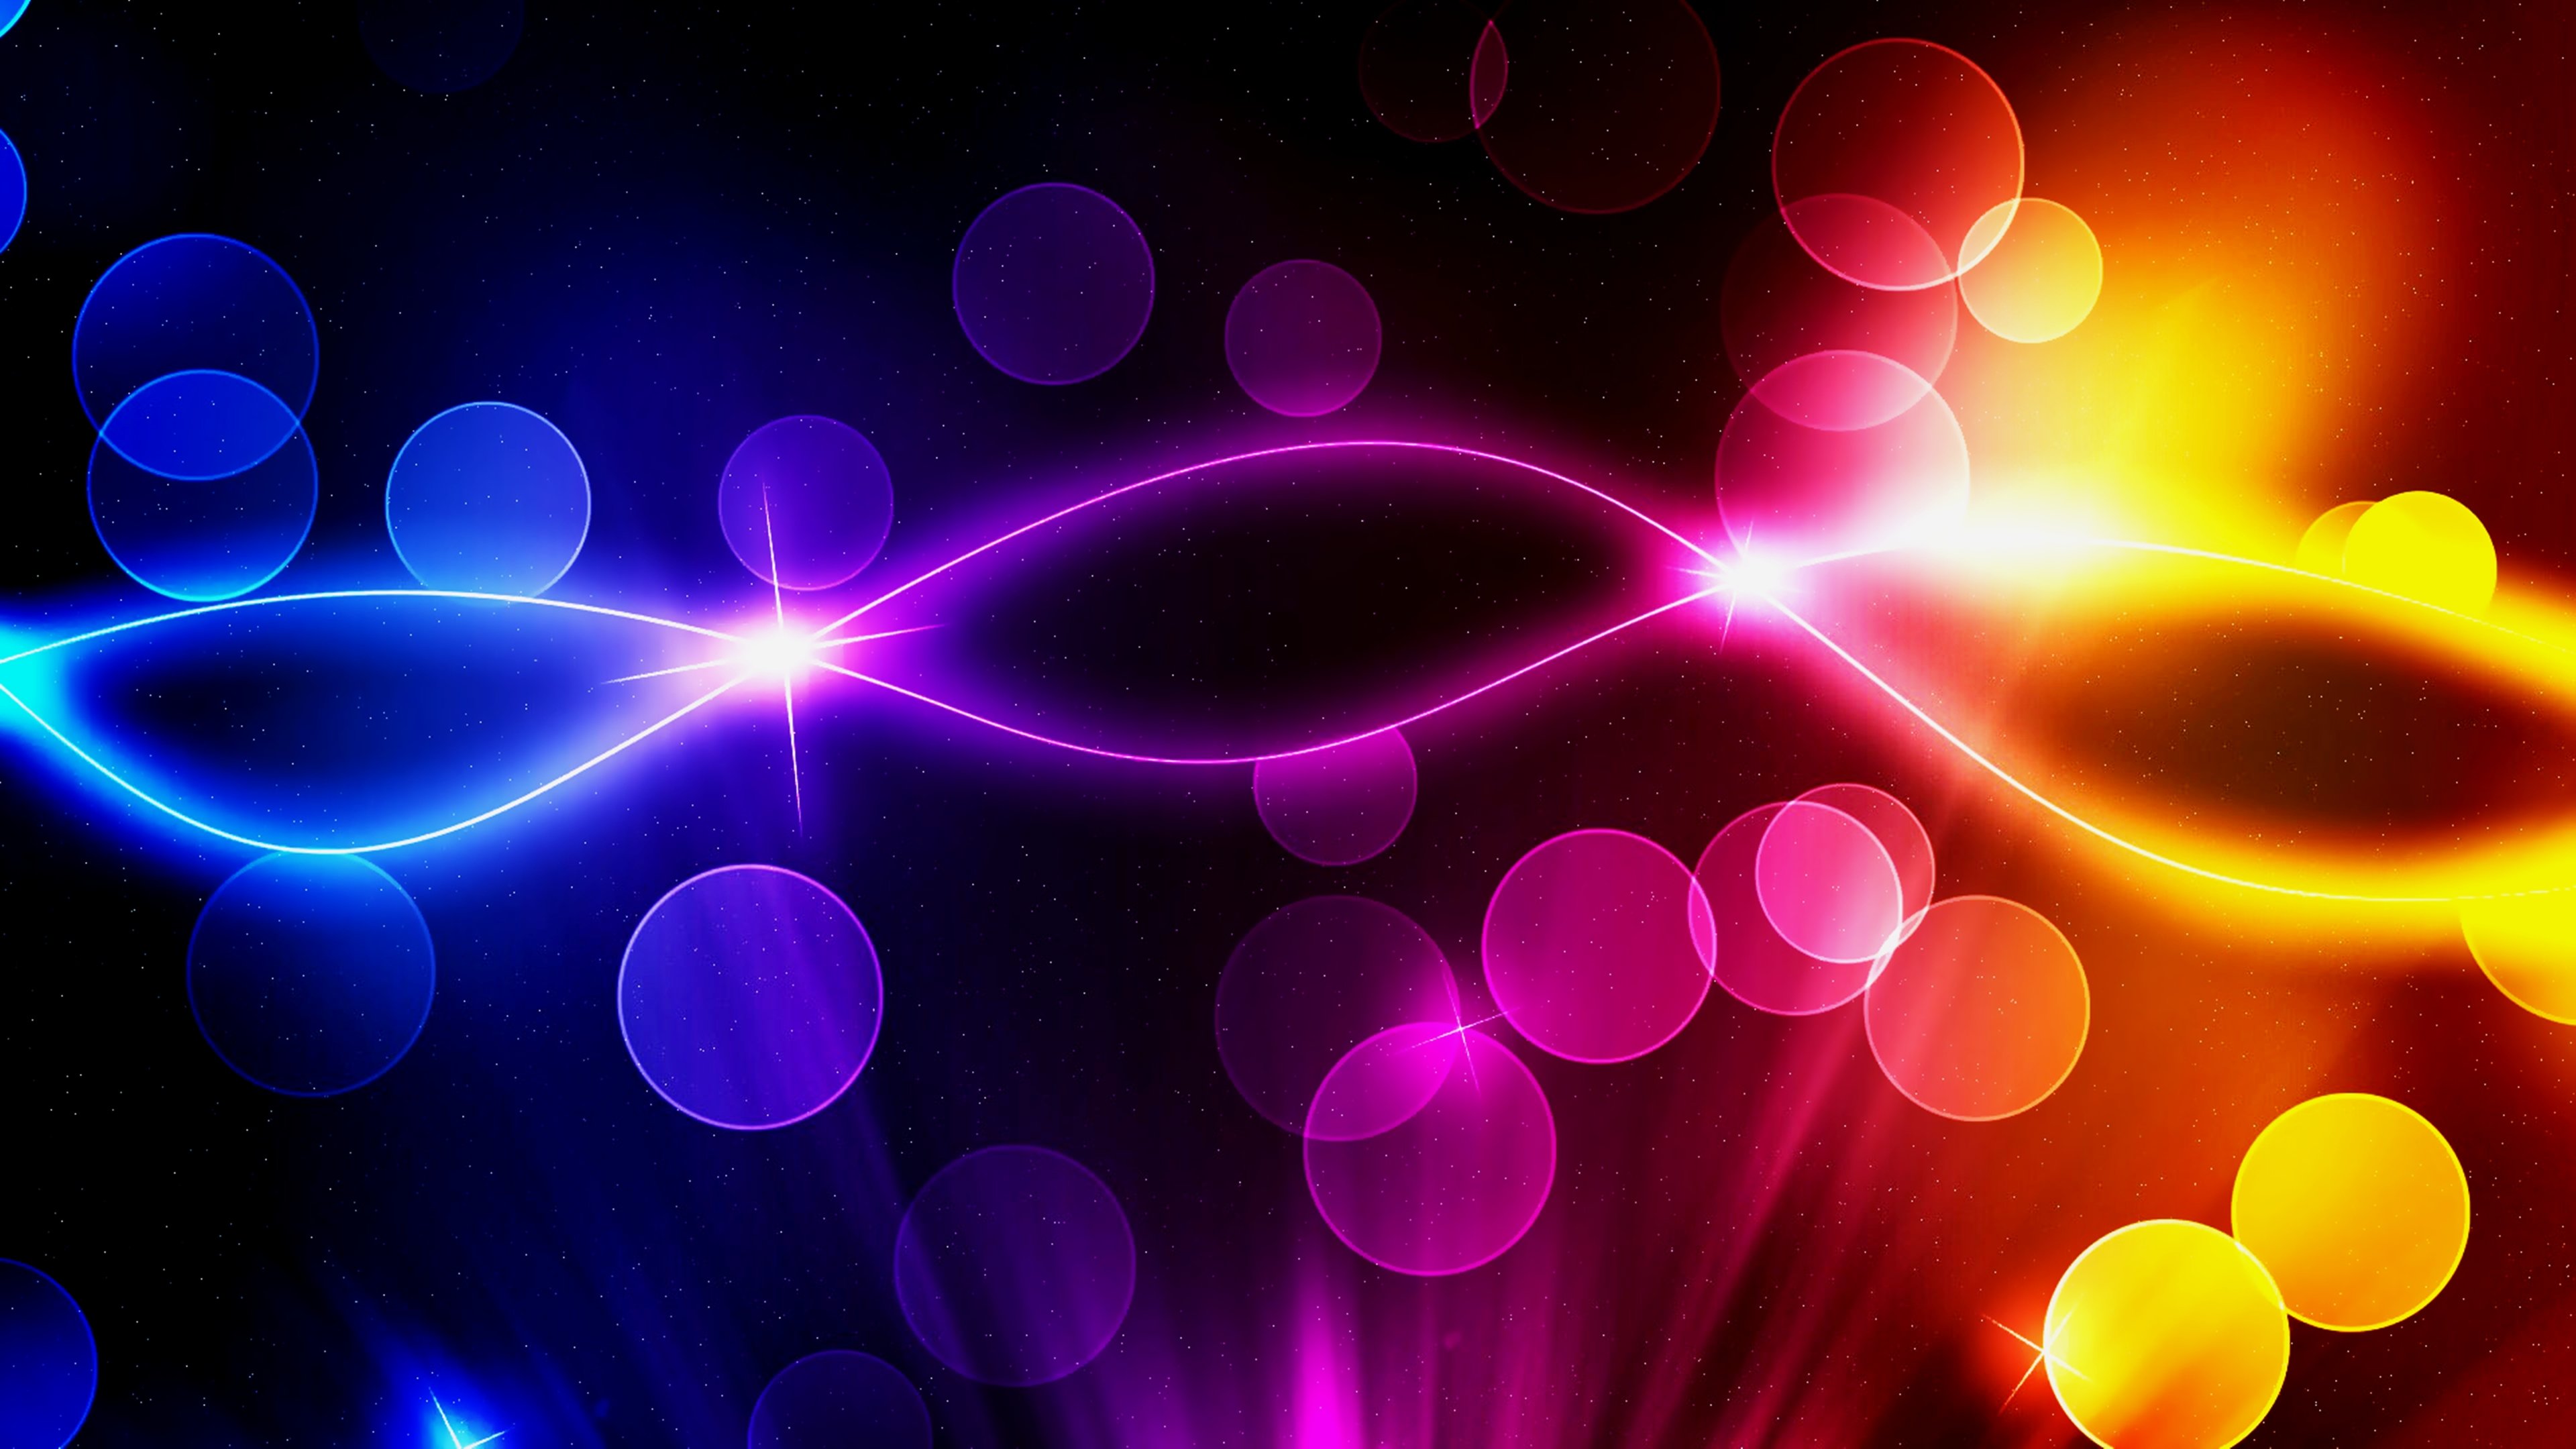 abstract, Art, Background, Blue, Colorful, Colors, Stars, Glowing, Neon, Wallpapers, Desktop Wallpaper